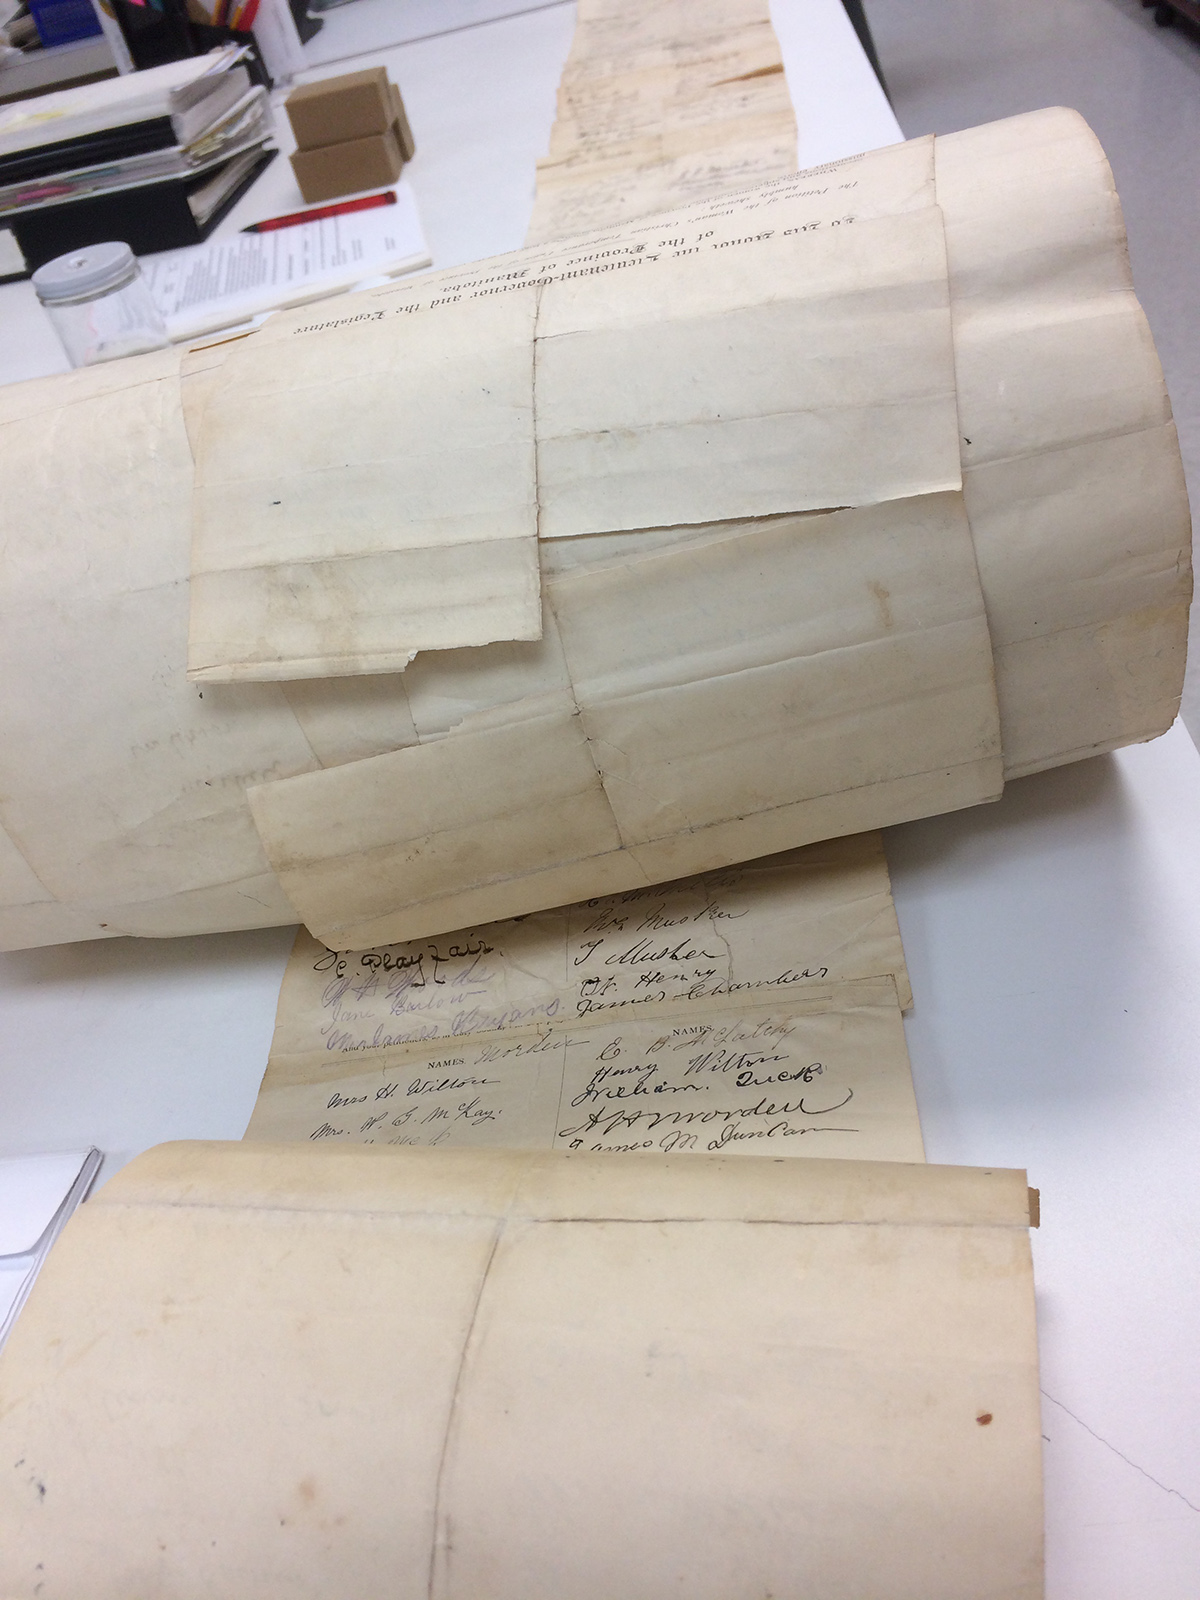 The 1893 petition undergoing preservation treatment